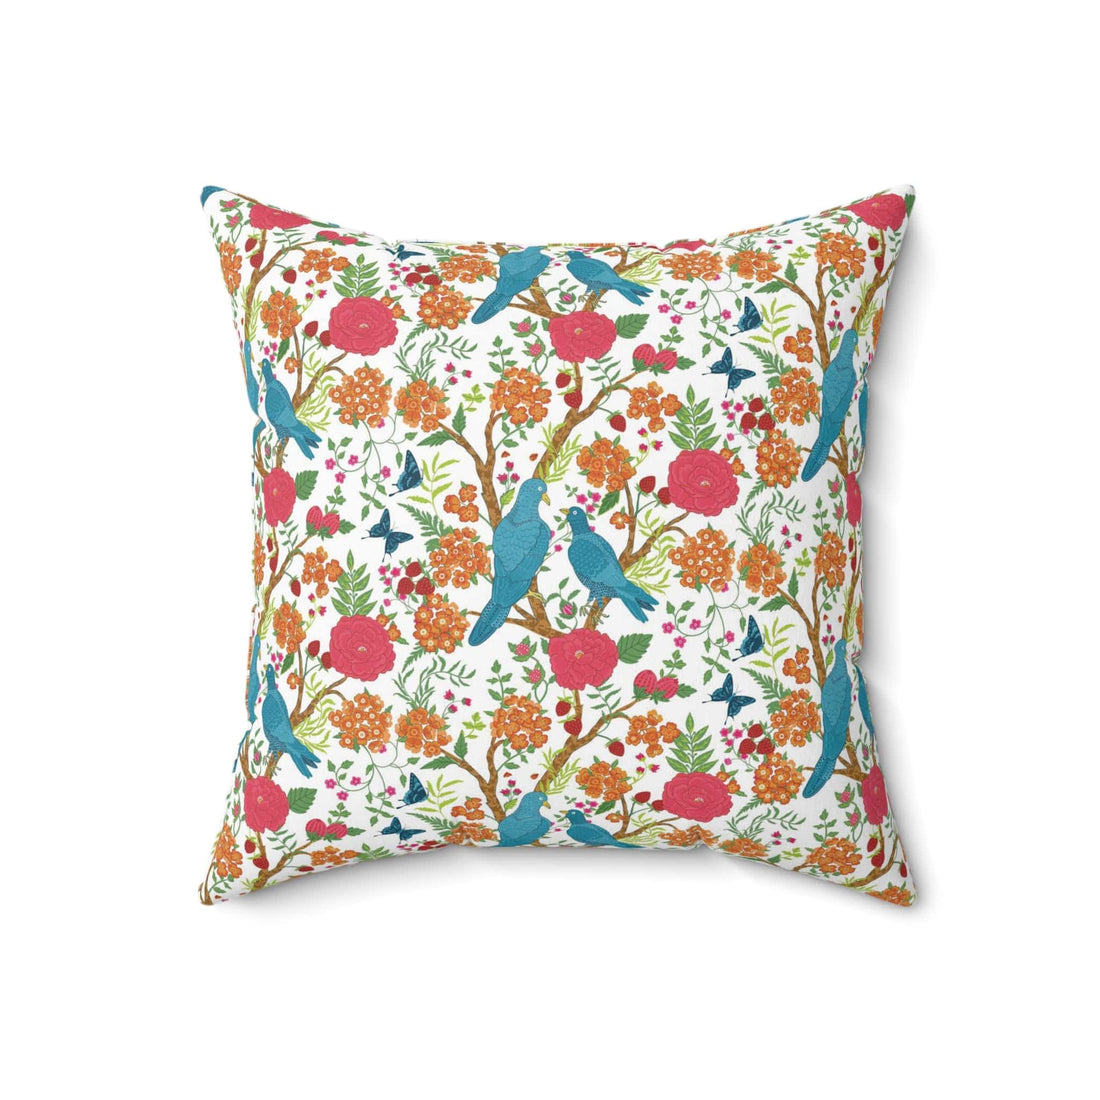 Kate McEnroe New York Chinoiserie Tropical Bird Garden Pillow with Insert, Floral Cushion, Botanical Bird Throw Pillow KM13809924 Throw Pillows 18&quot; × 18&quot; 74992403678415024215